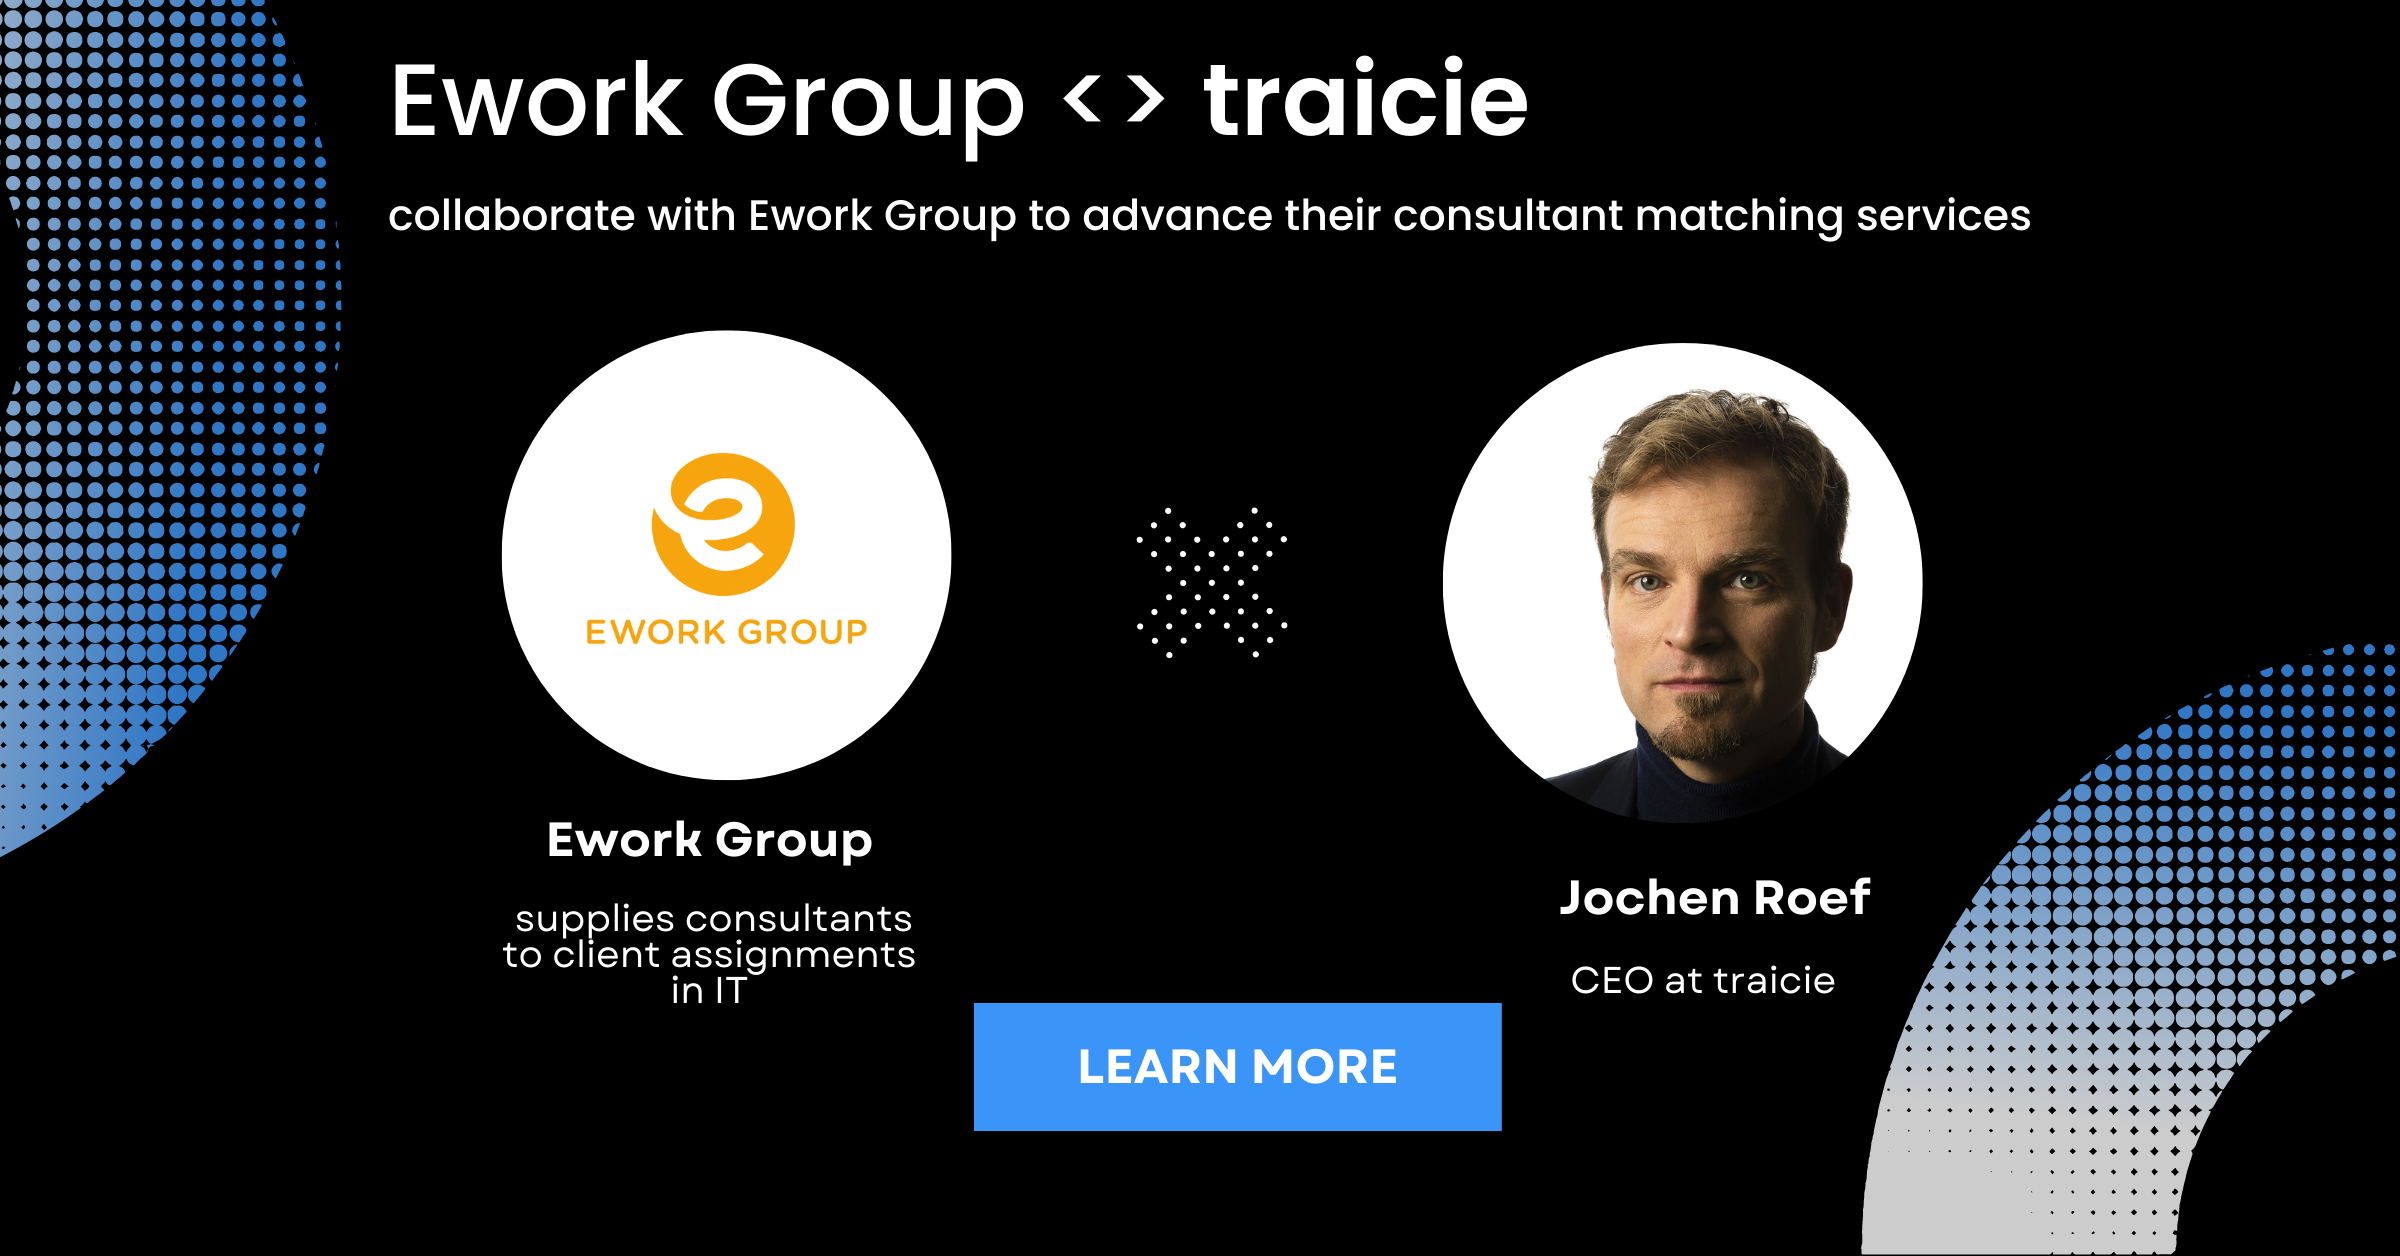 Ework Group <> traicie advance their consultant matching services in IT